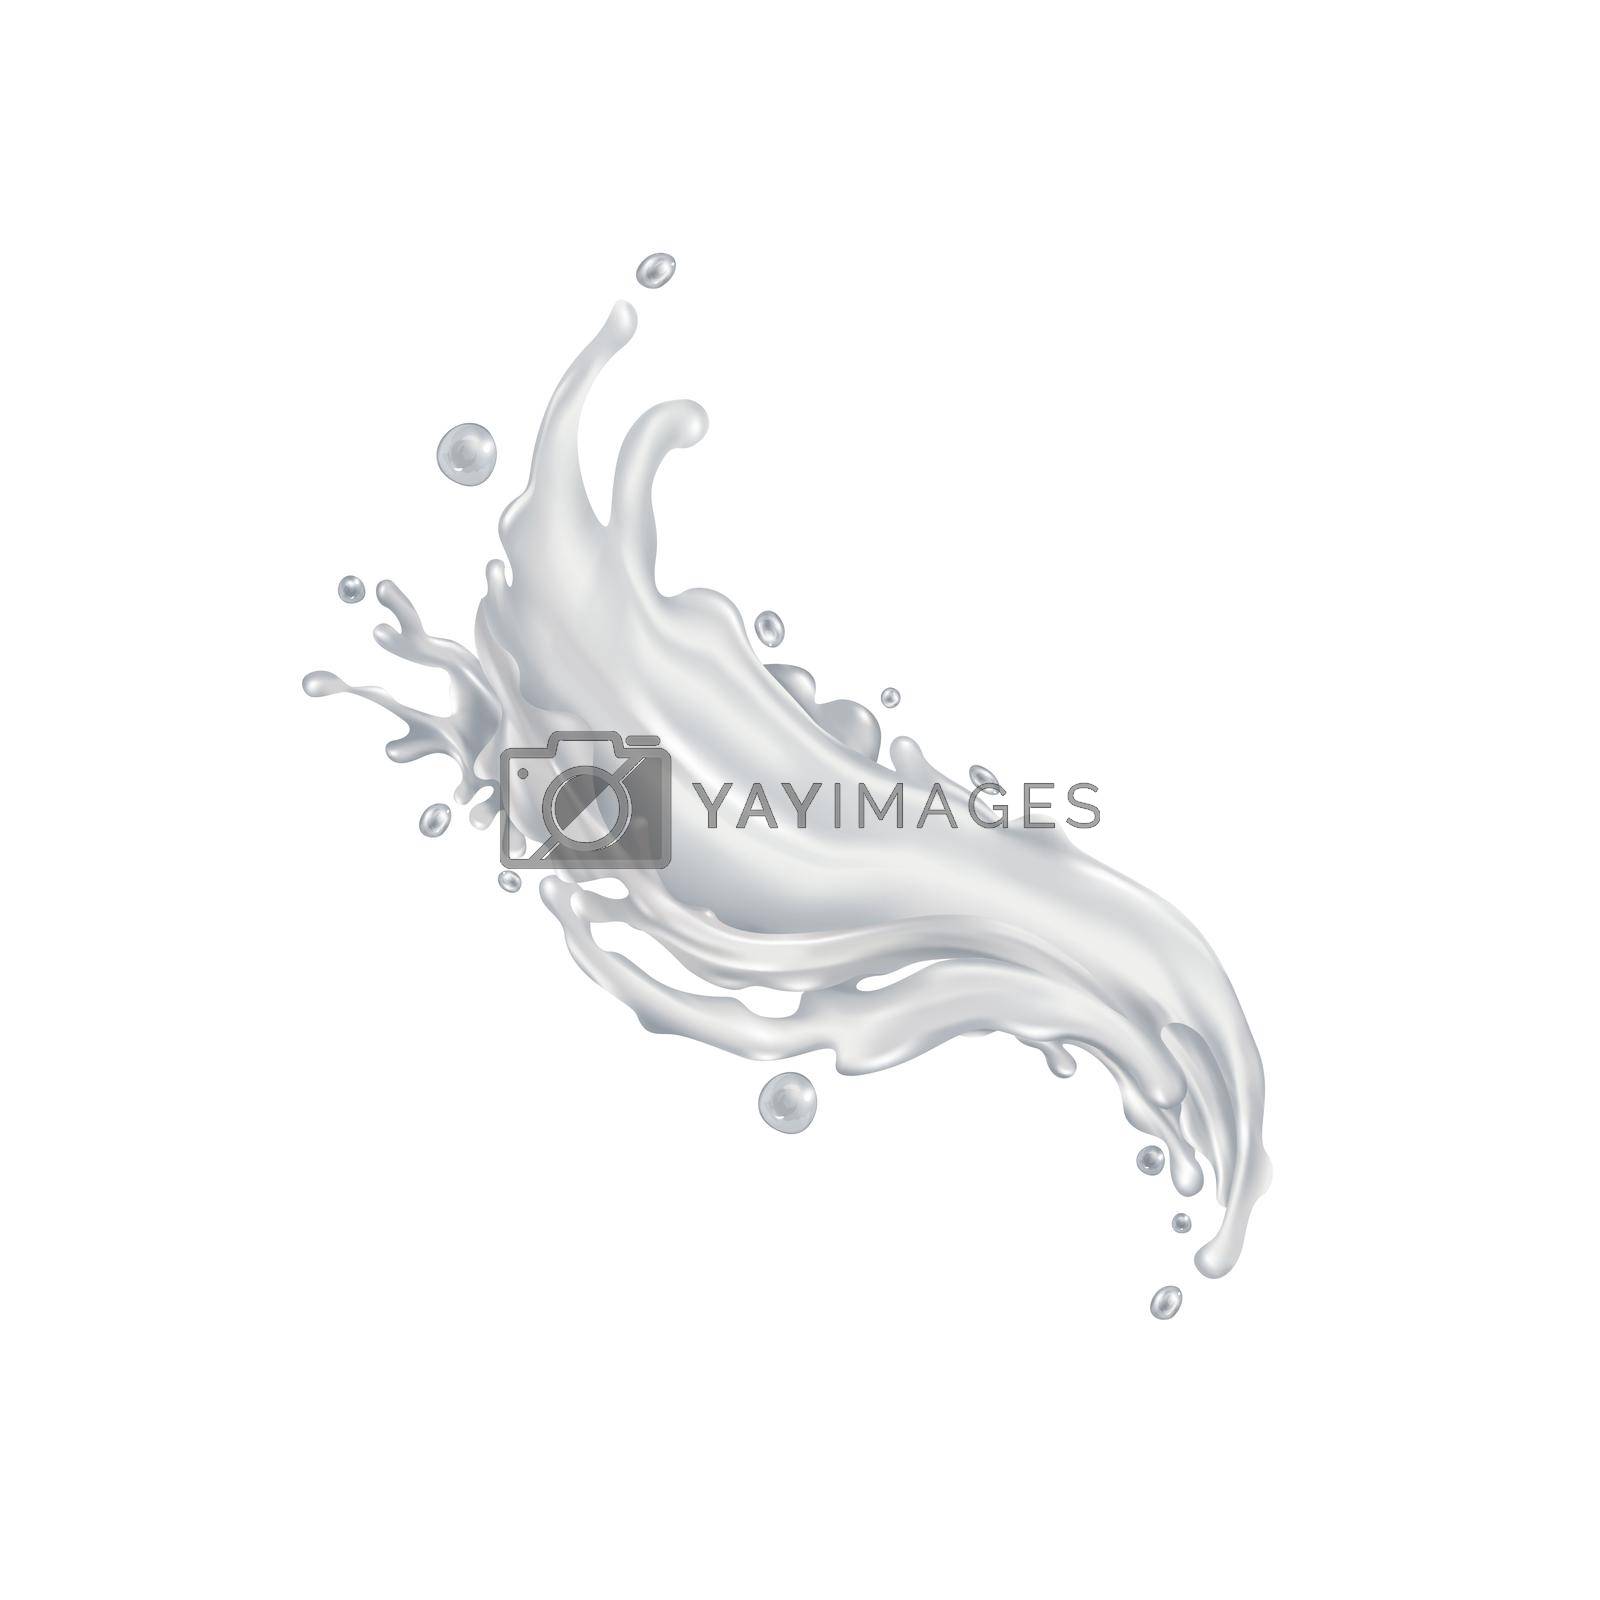 Royalty free image of Milk drink splash on a white background by ConceptCafe